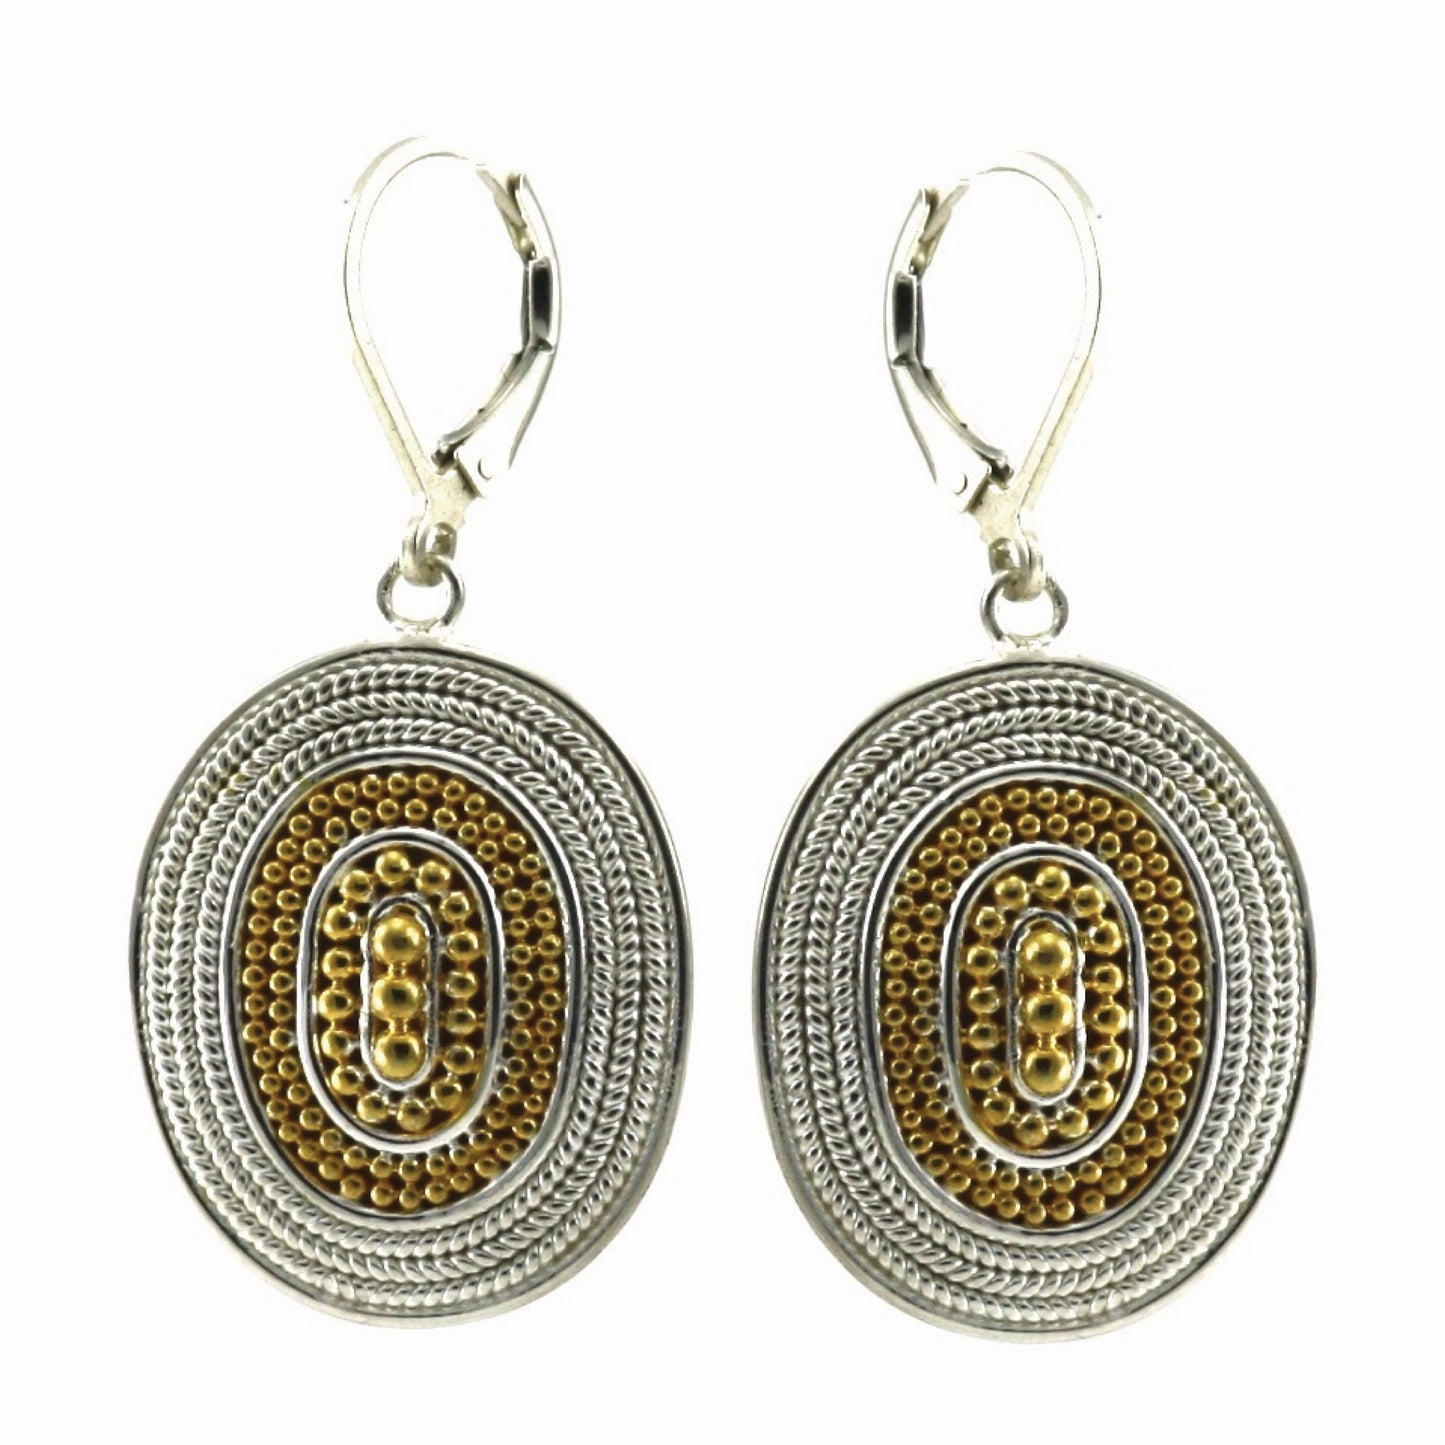 E176G RAYA Hand Beaded Oval Earrings with Rope Trim and 18k Gold Vermeil